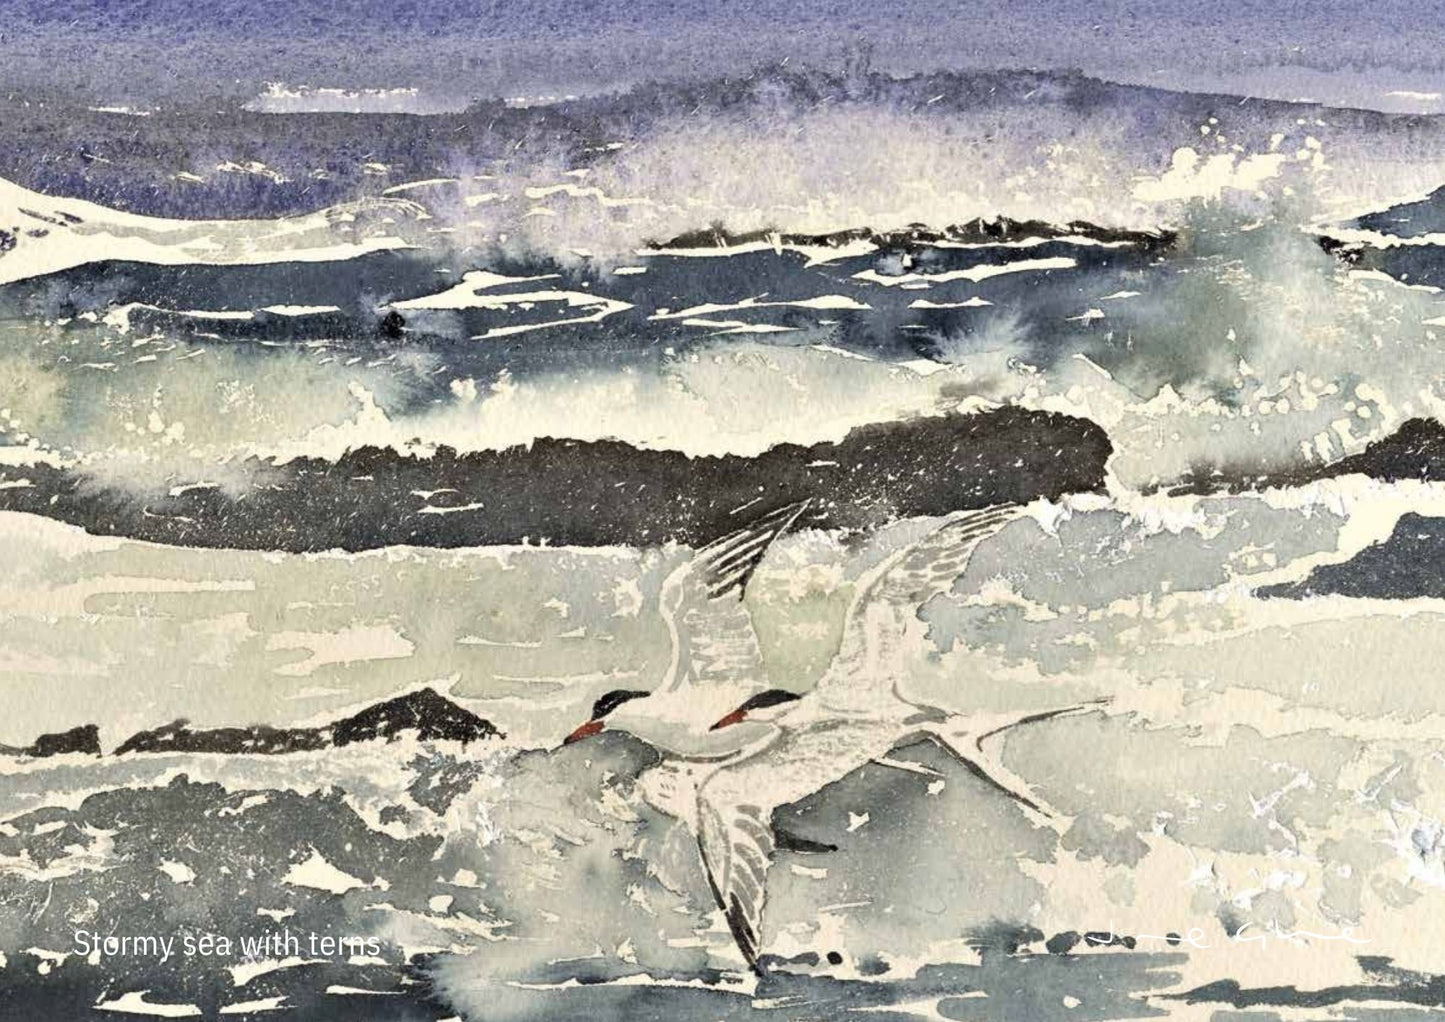 Orkney calendar 2025 watercolour picture of two seabirds, terns flying against a stormy sea by Orkney artist Jane Glue Scotland